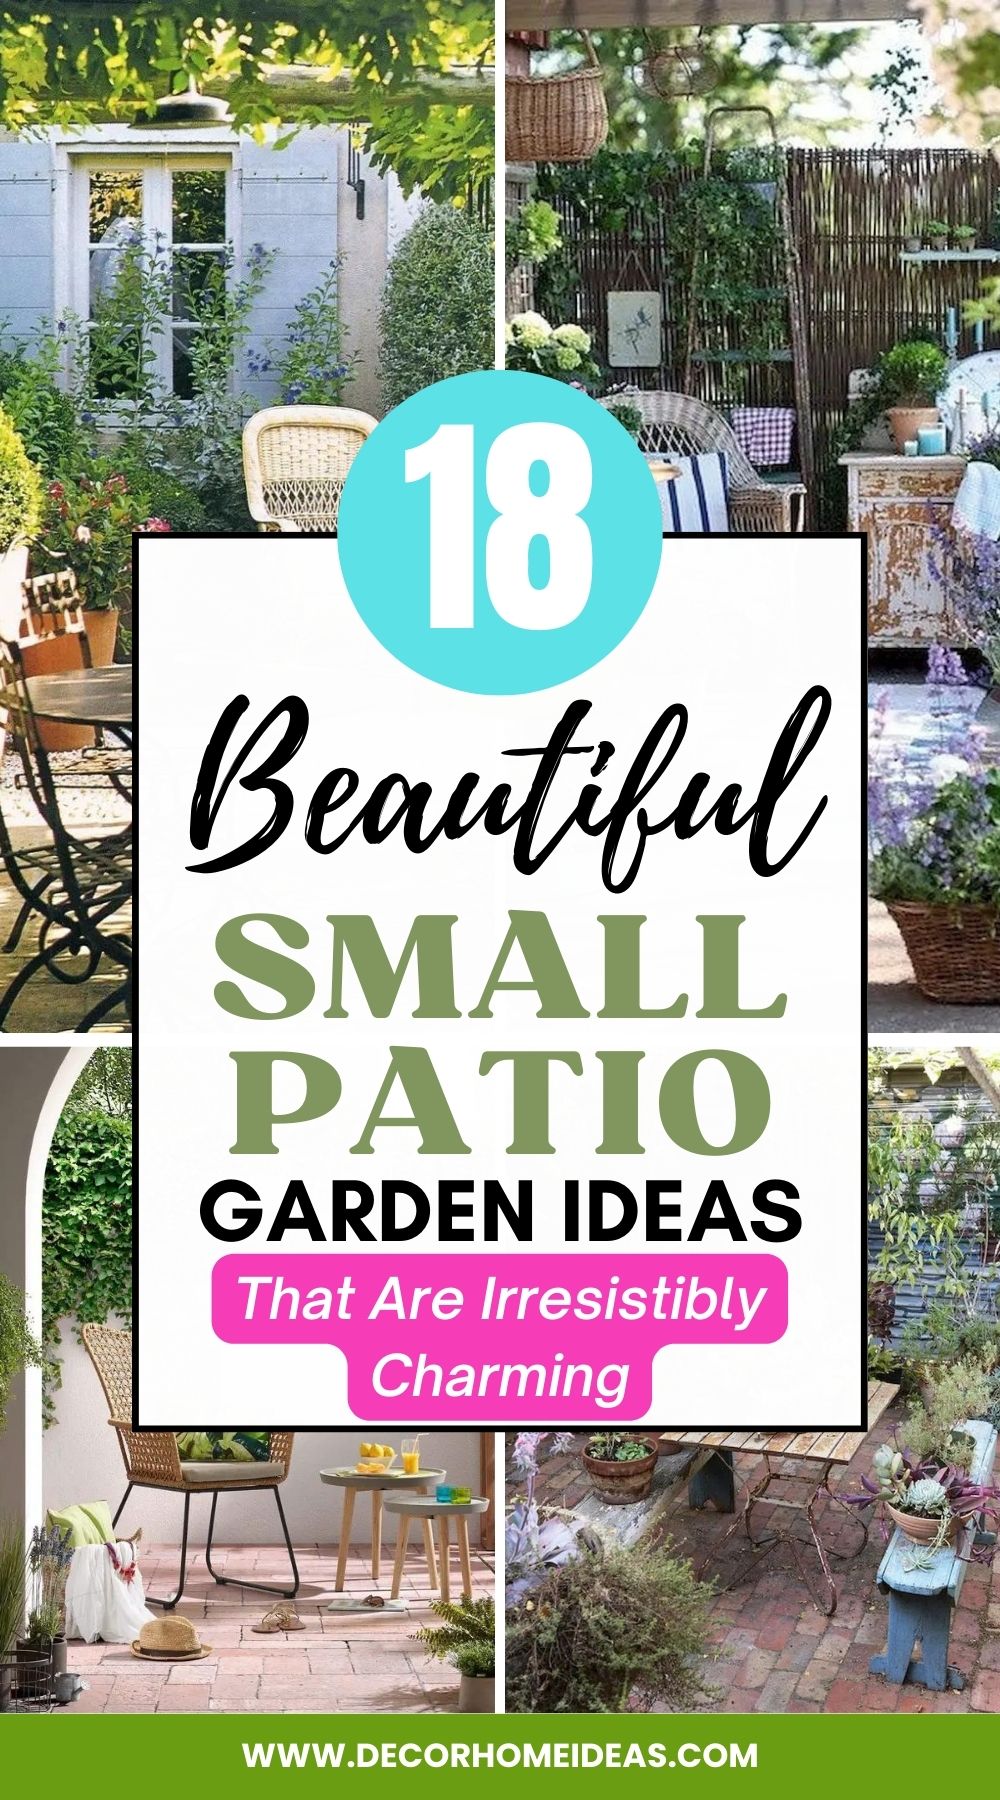 Discover 18 enchanting small patio garden ideas that exude charm and allure. Transform your outdoor space with these appealing and creative designs, perfect for maximizing beauty in limited areas.